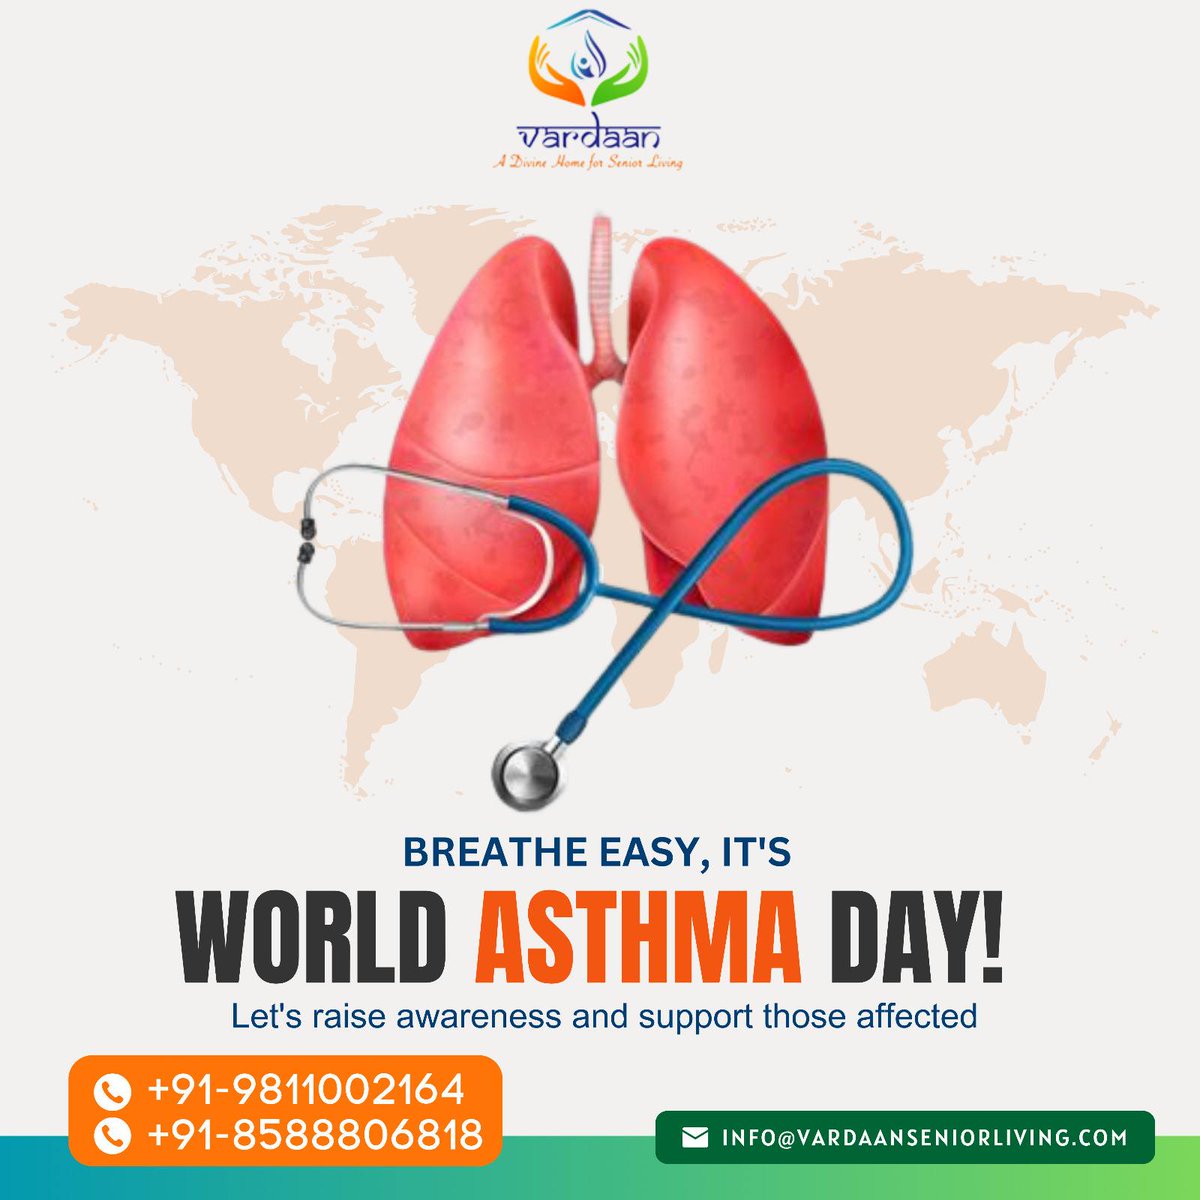 World Asthma Day
Breathing is life.... Let us work together for a cleaner and healthier environment to stay safe from Asthma.

#WorldAsthmaDay #Asthma #AsthmaAwareness #AsthmaProblems #Health #AsthmaRelief #Asthmatic #RespiratoryTherapist #AsthmaAttack #COVID #FYP #LifeSupport